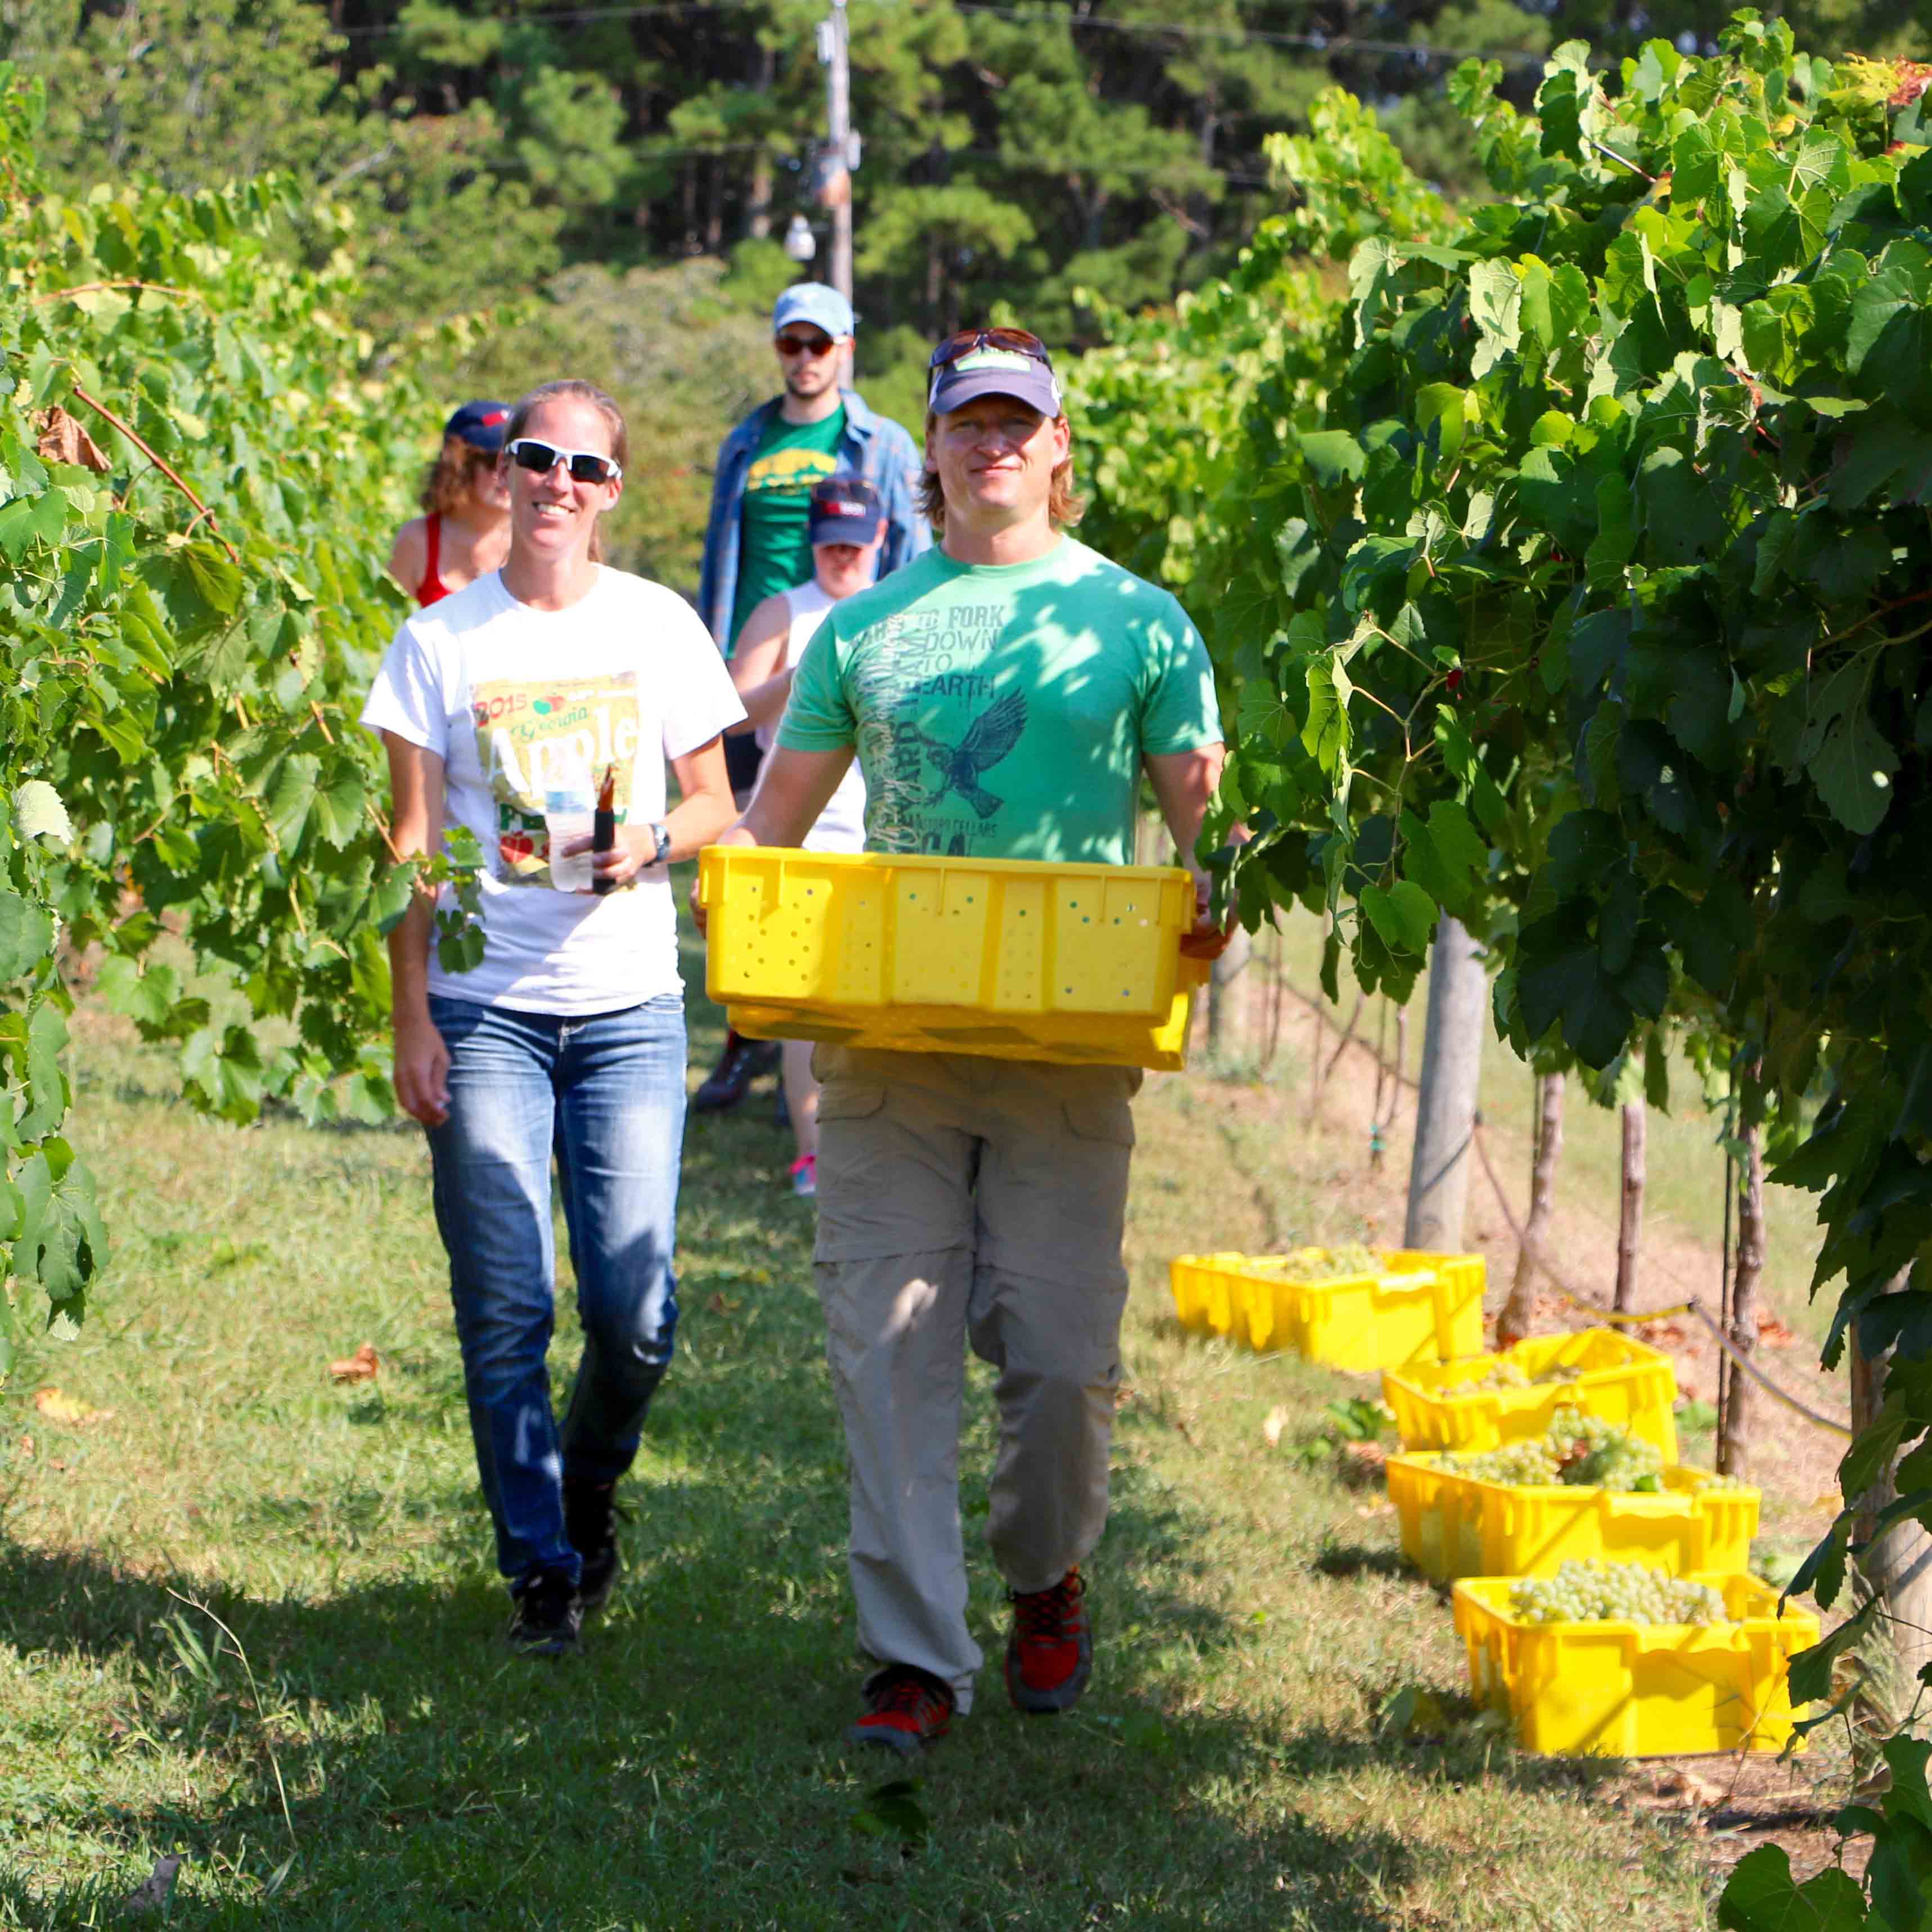 On August 16, UGA Extension specialists will offer aspiring wine makers a crash course on the wine industry.